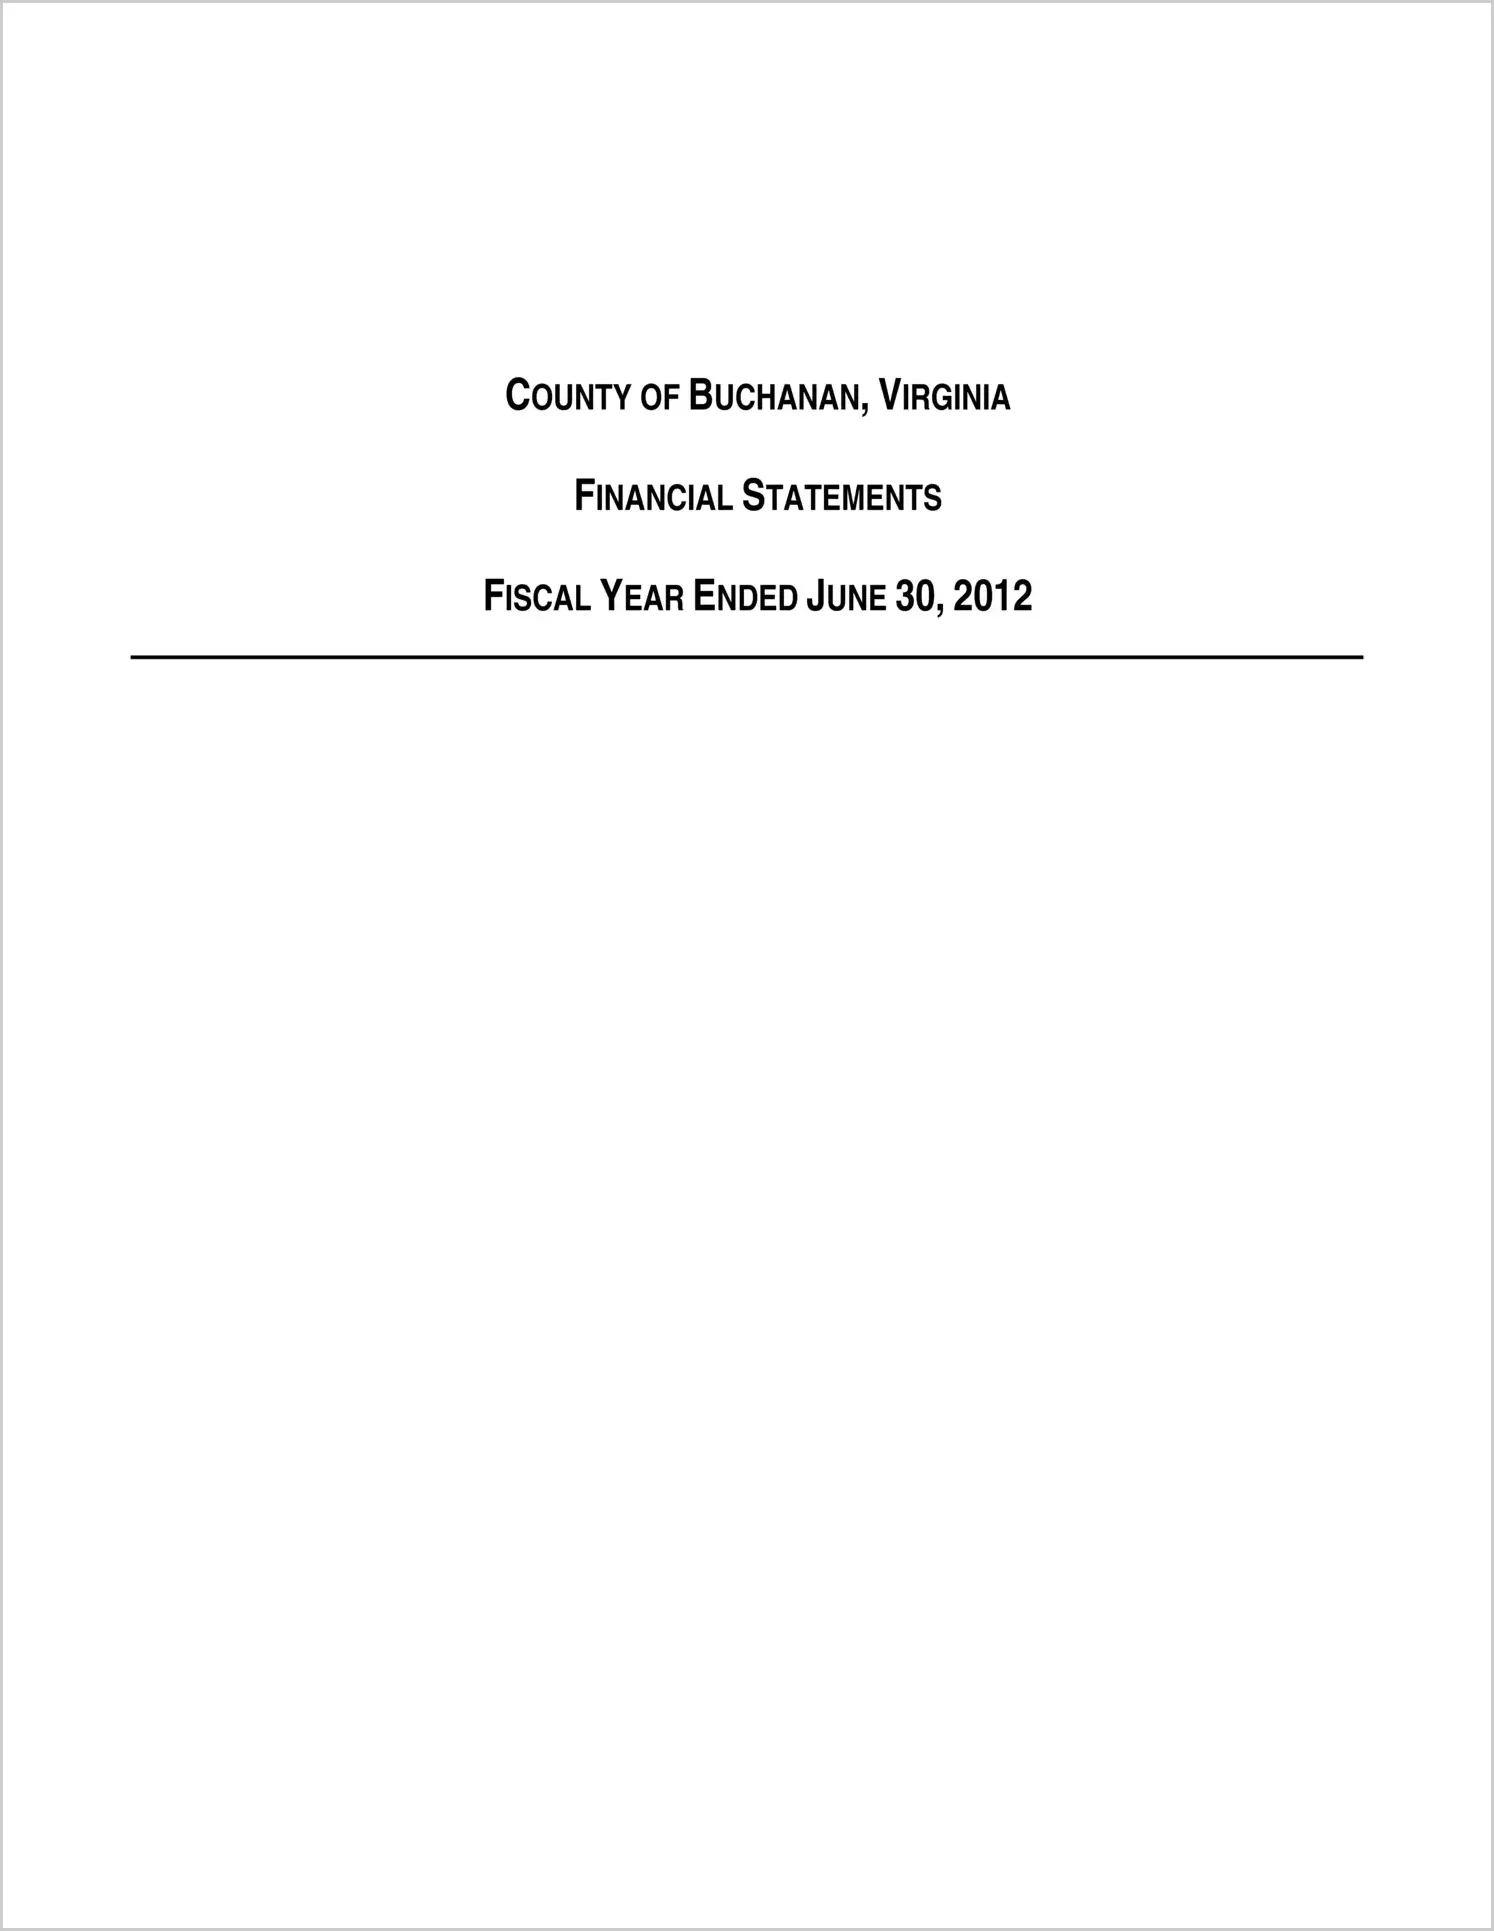 2012 Annual Financial Report for County of Buchanan